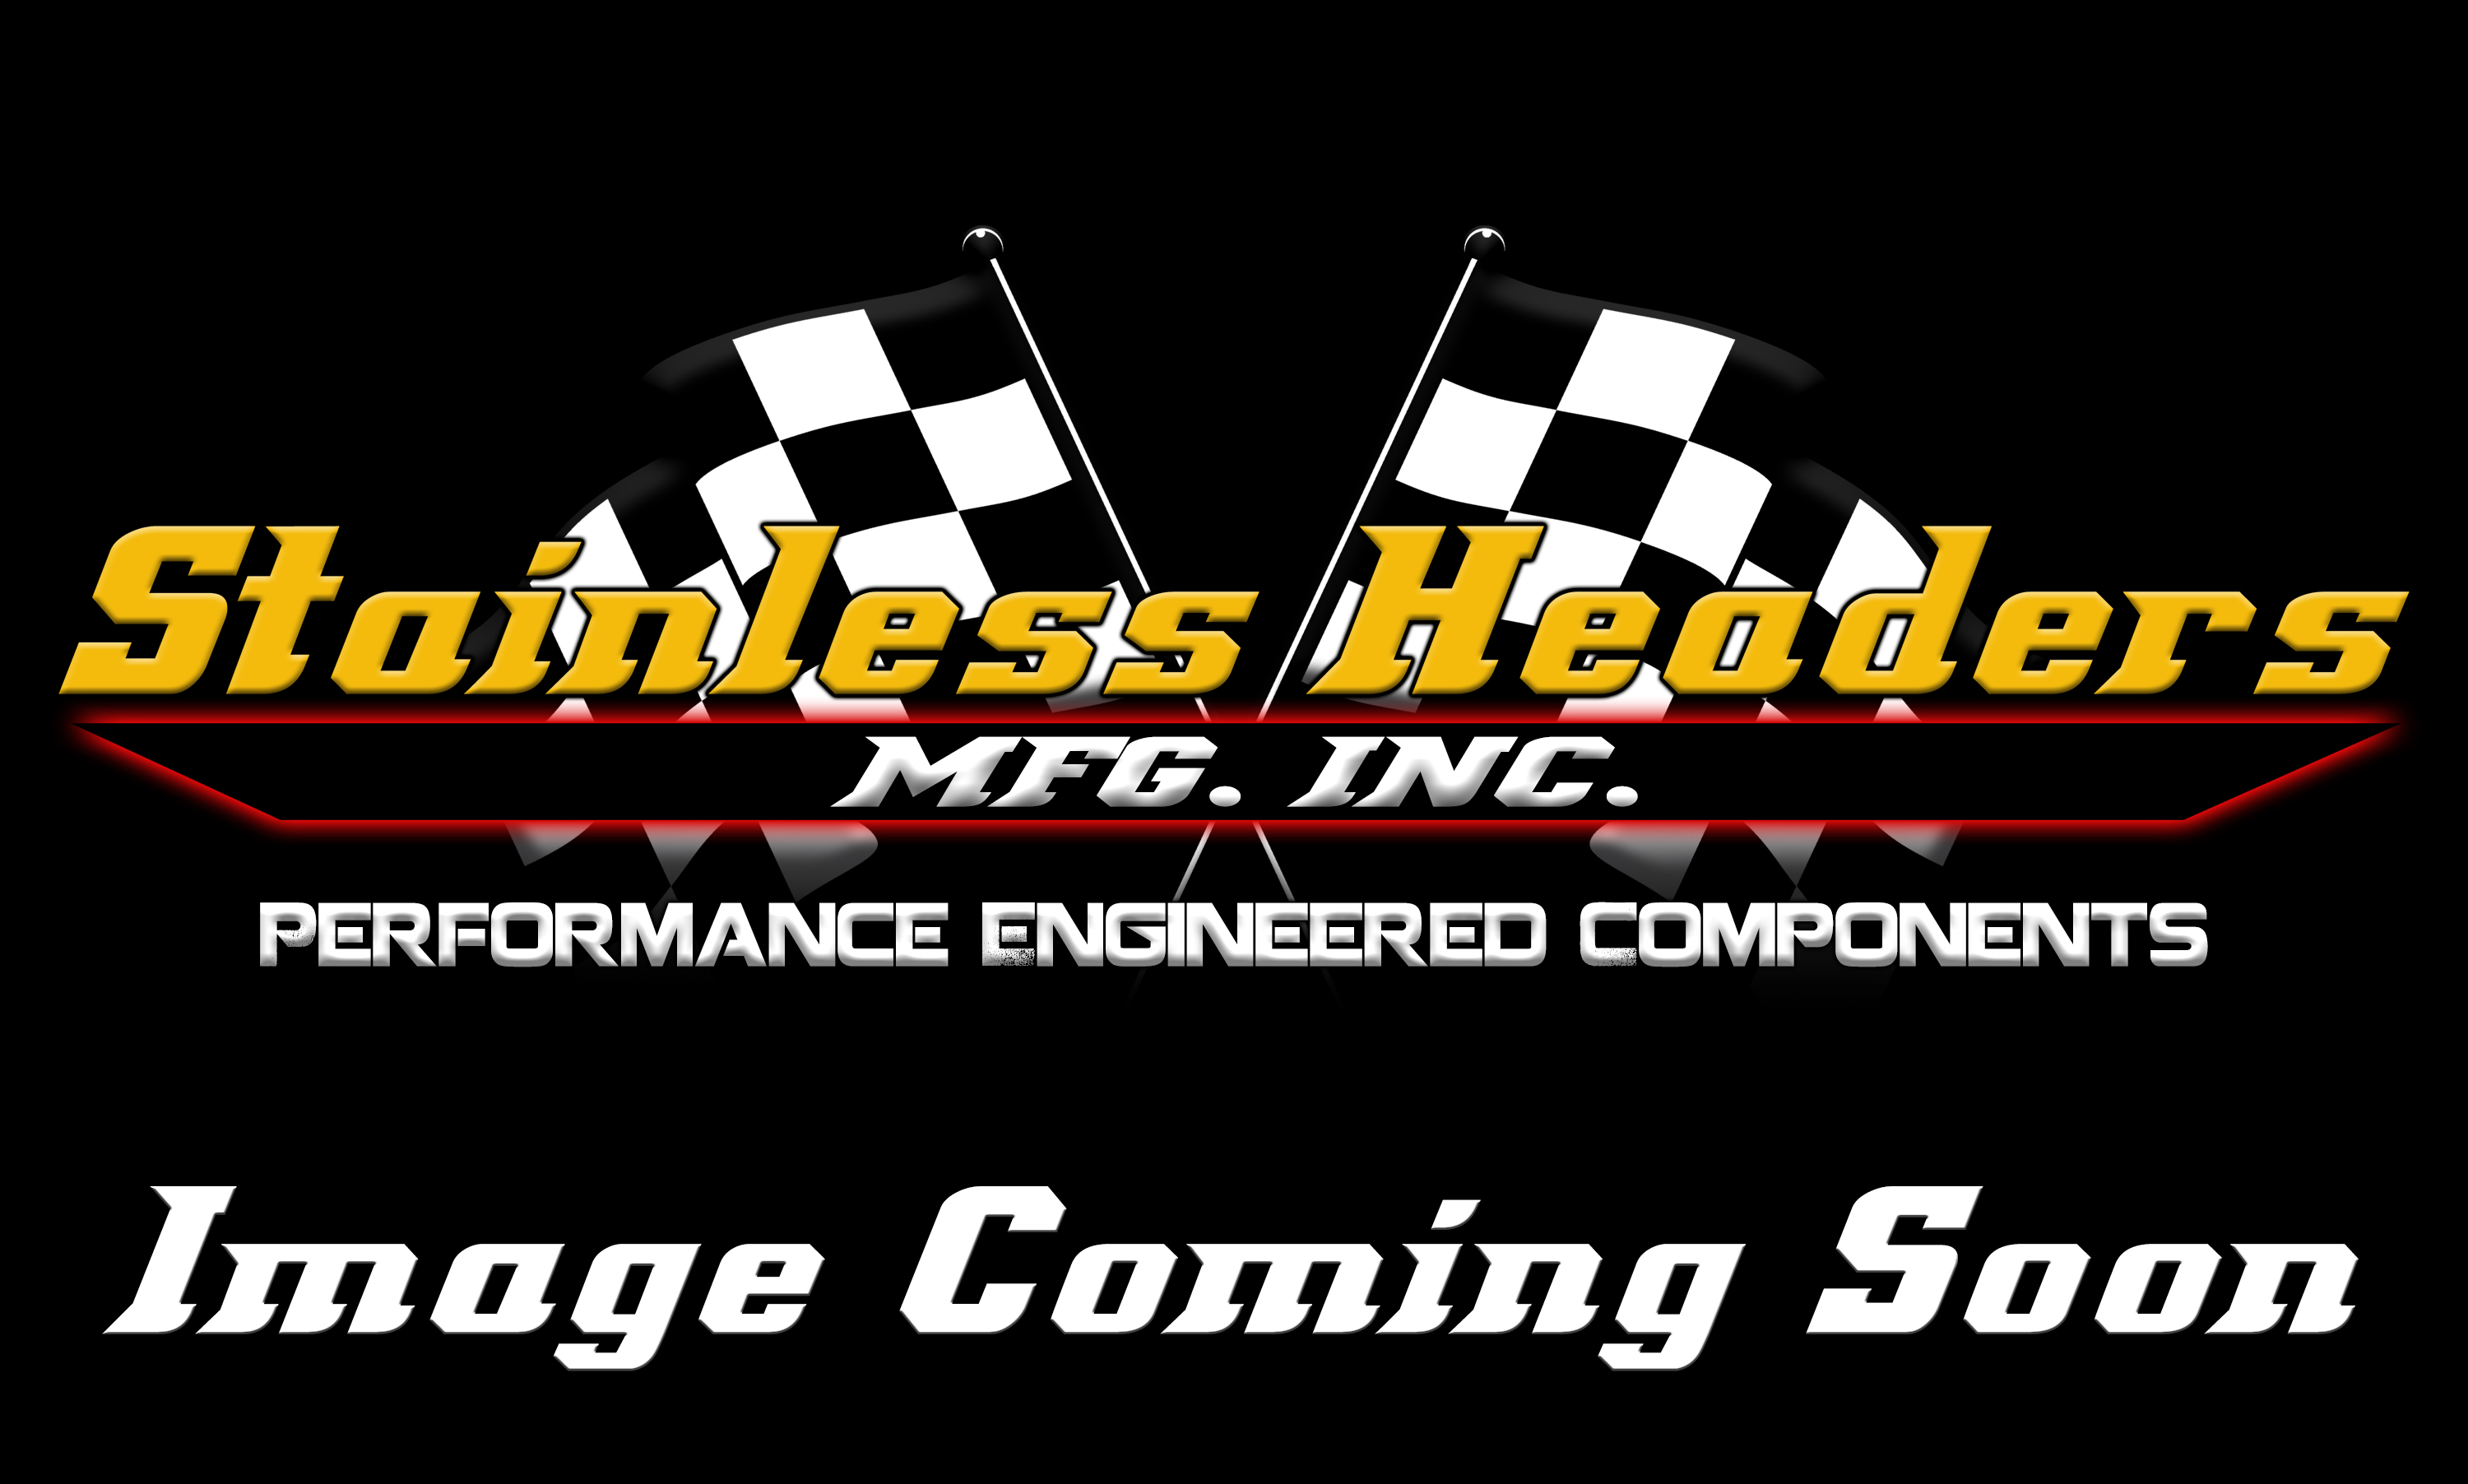 CompTurbo Technologies - CTR4202R-7290 Mid Frame Oil-Less 3.0 Turbocharger (1250 HP) - Image 2